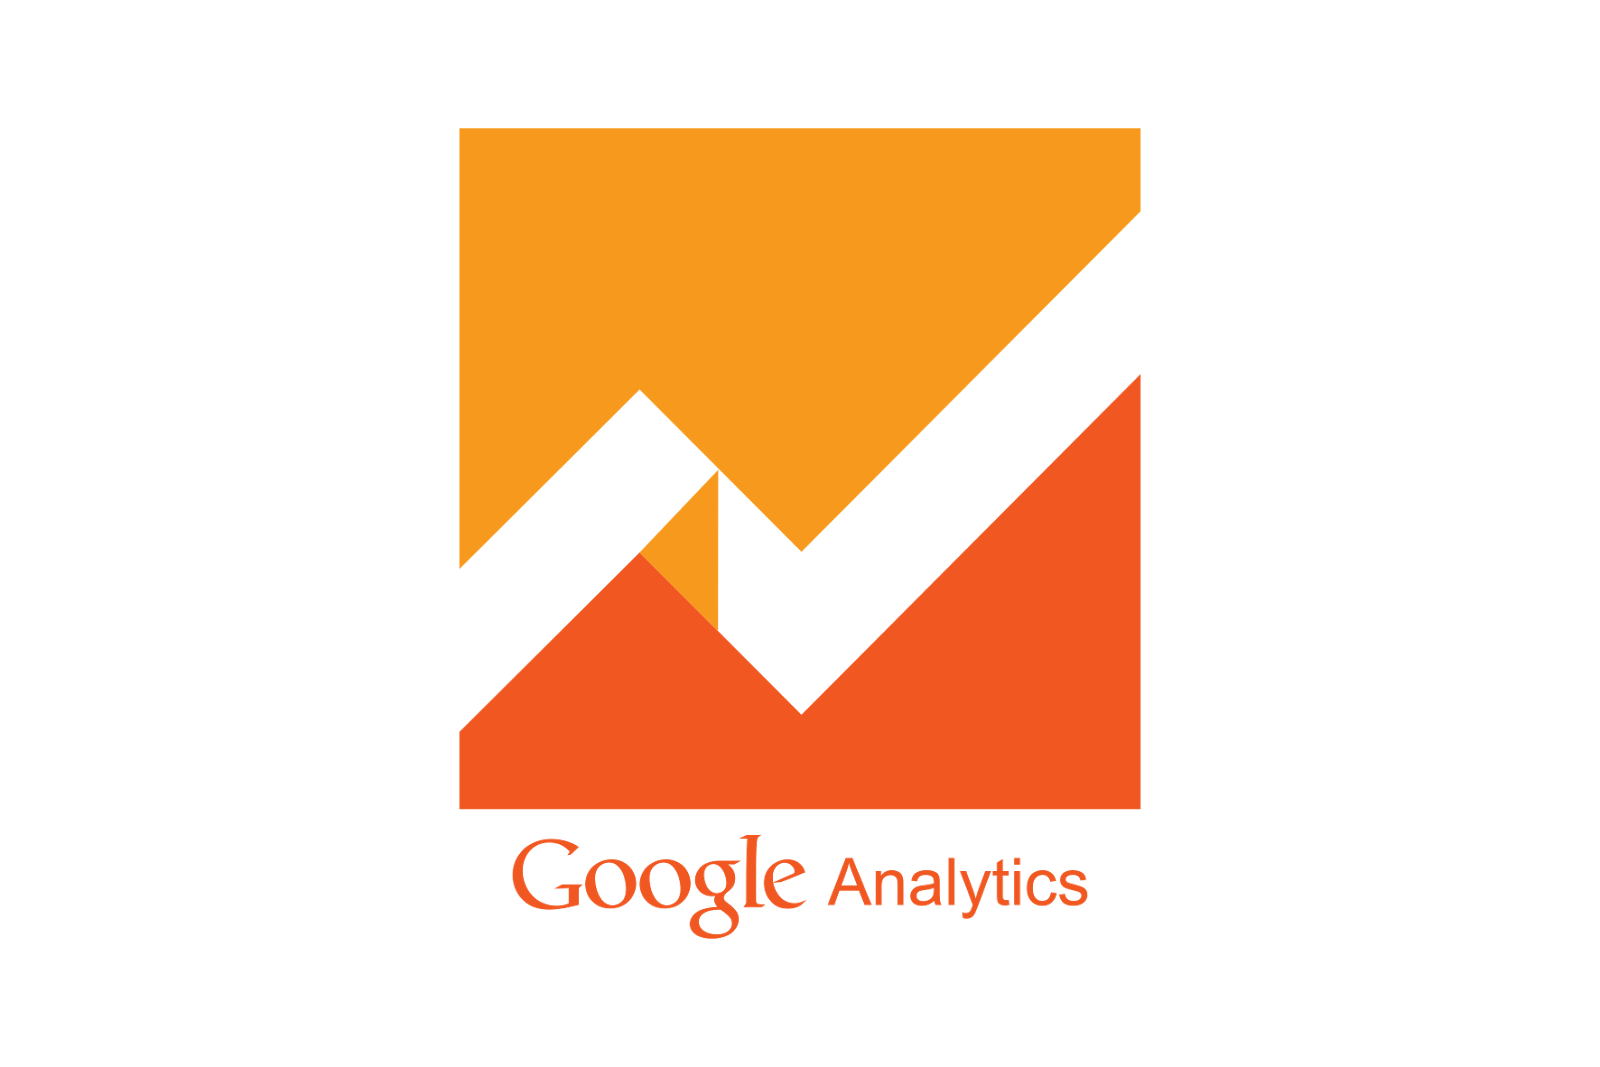 Use Google Analytics to Optimize Your Online Marketing Activities